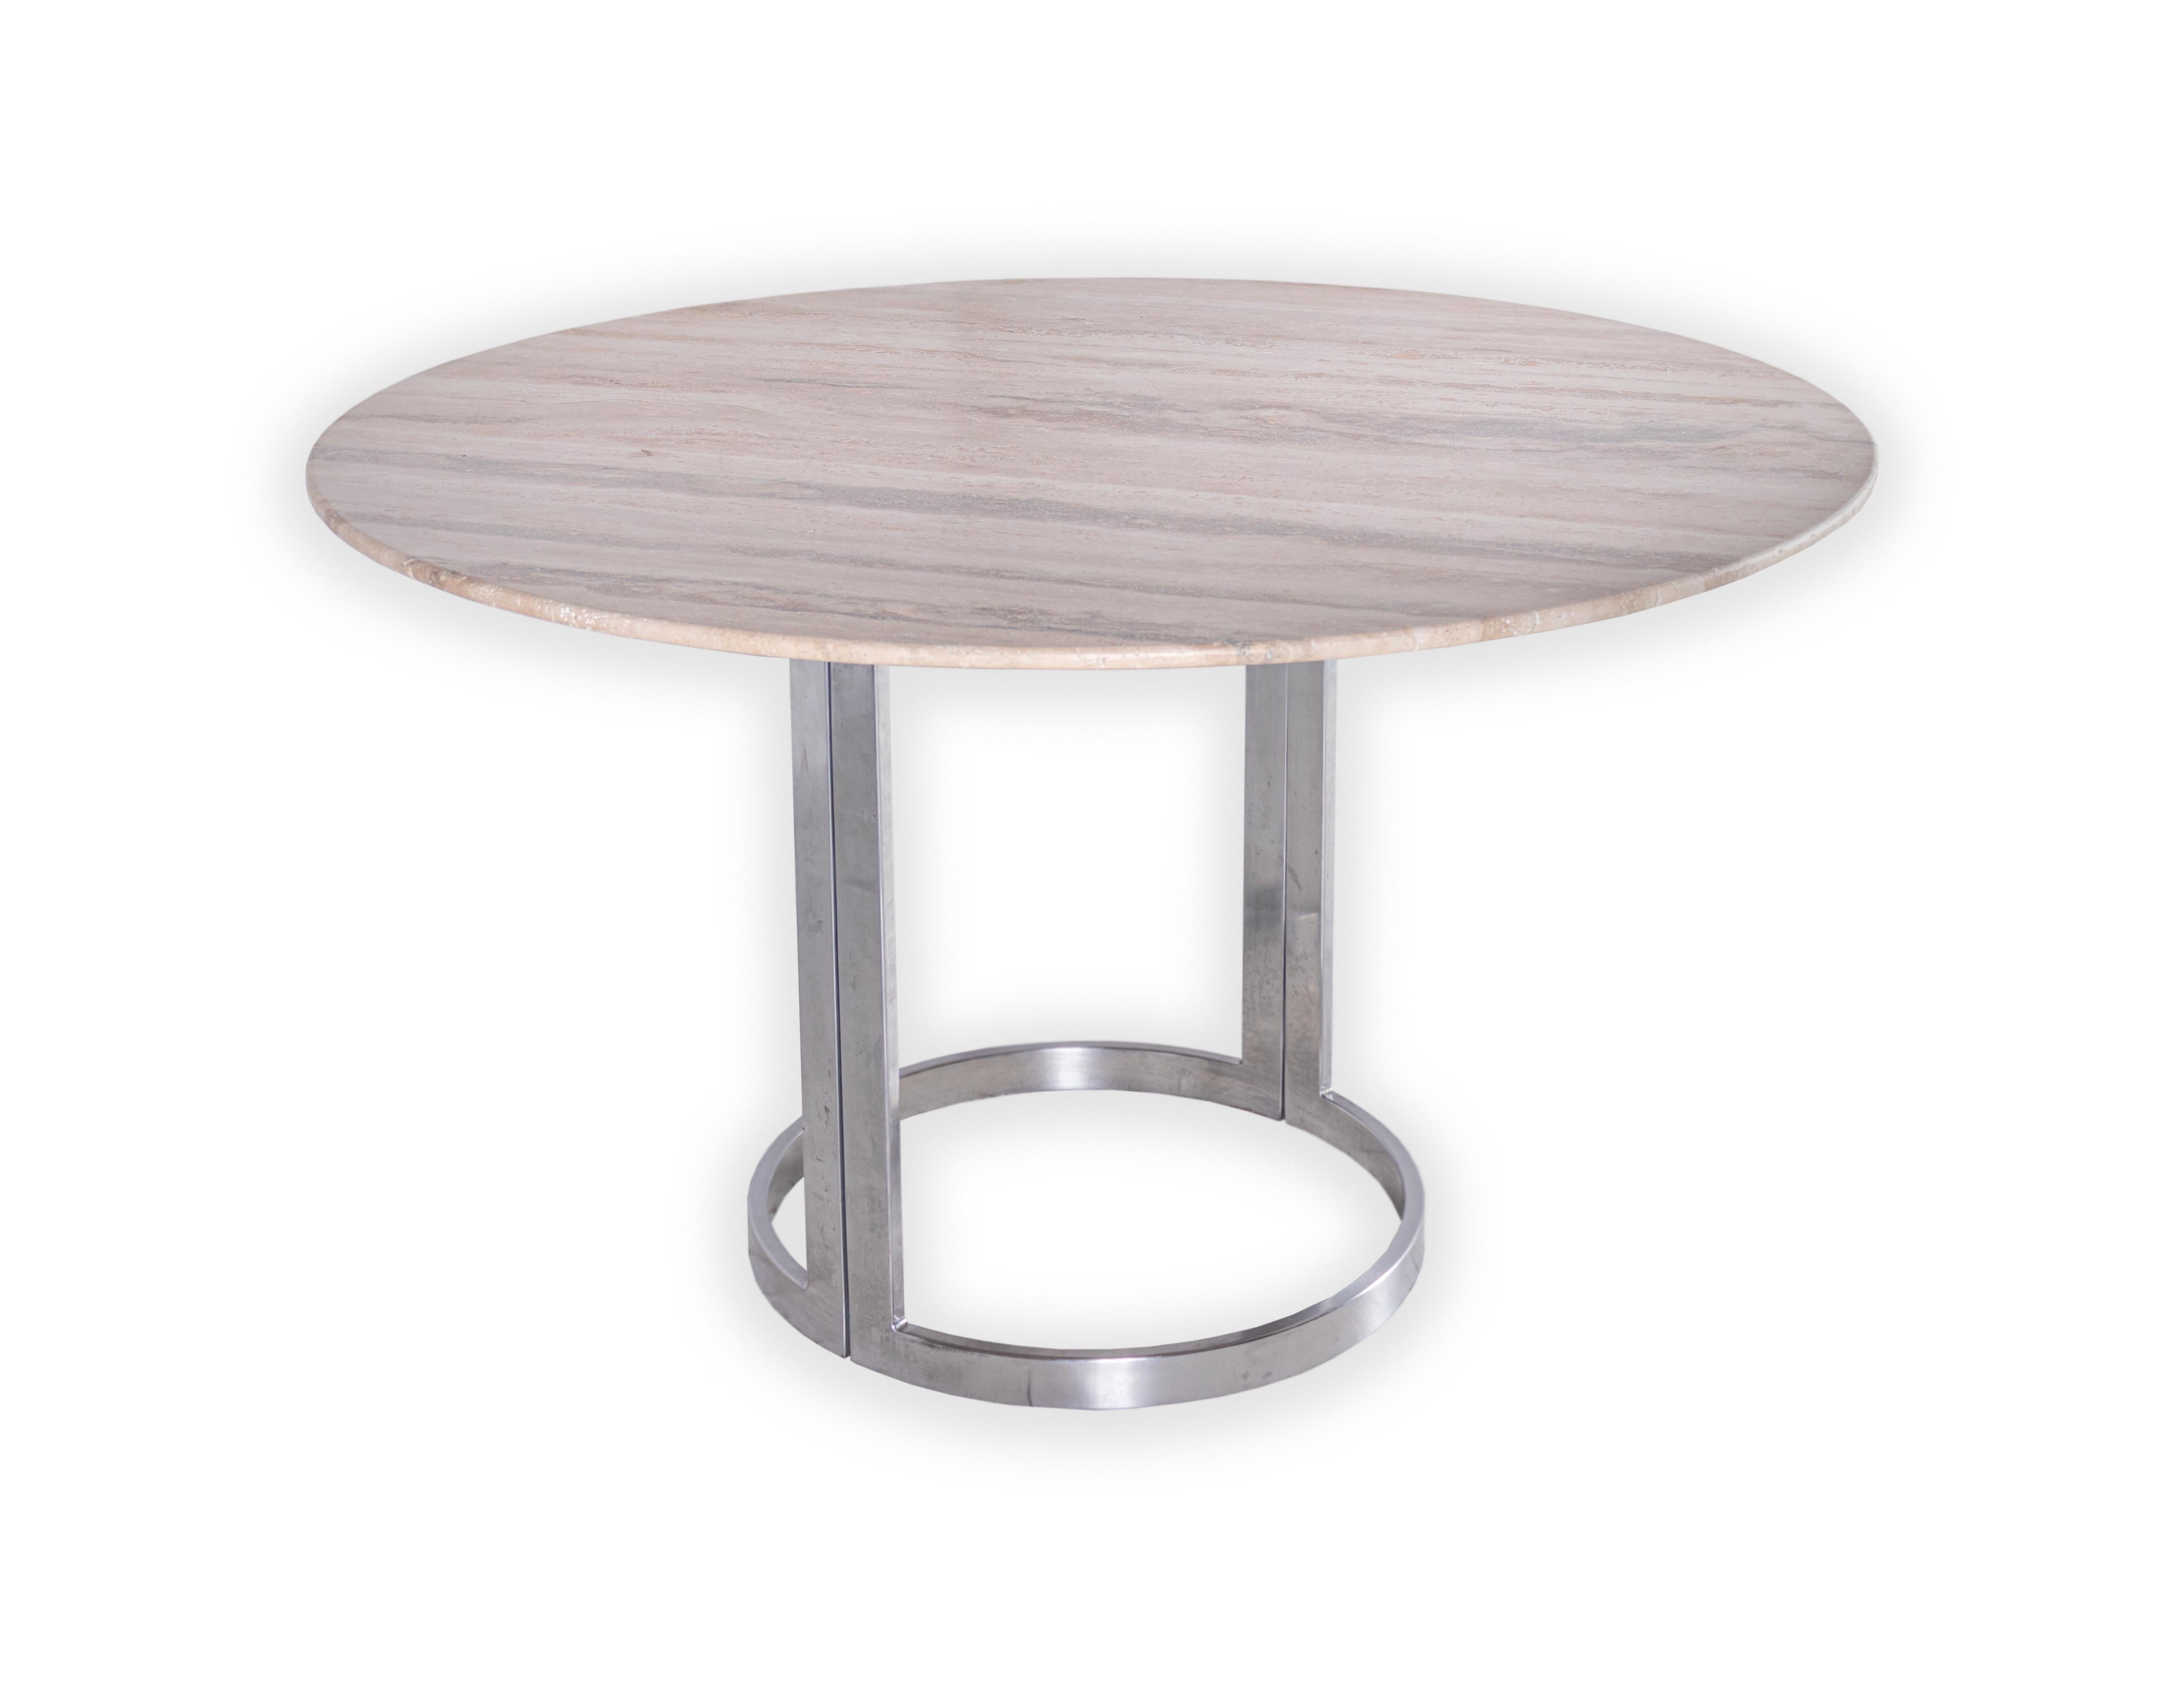 Jay Spectre chrome table base with custom Knoll edge travertine.
   
Designed by Brendan Bass for the Vision and Design Collection, by using high quality materials and textures. All materials are sourced from local vendors throughout the state of